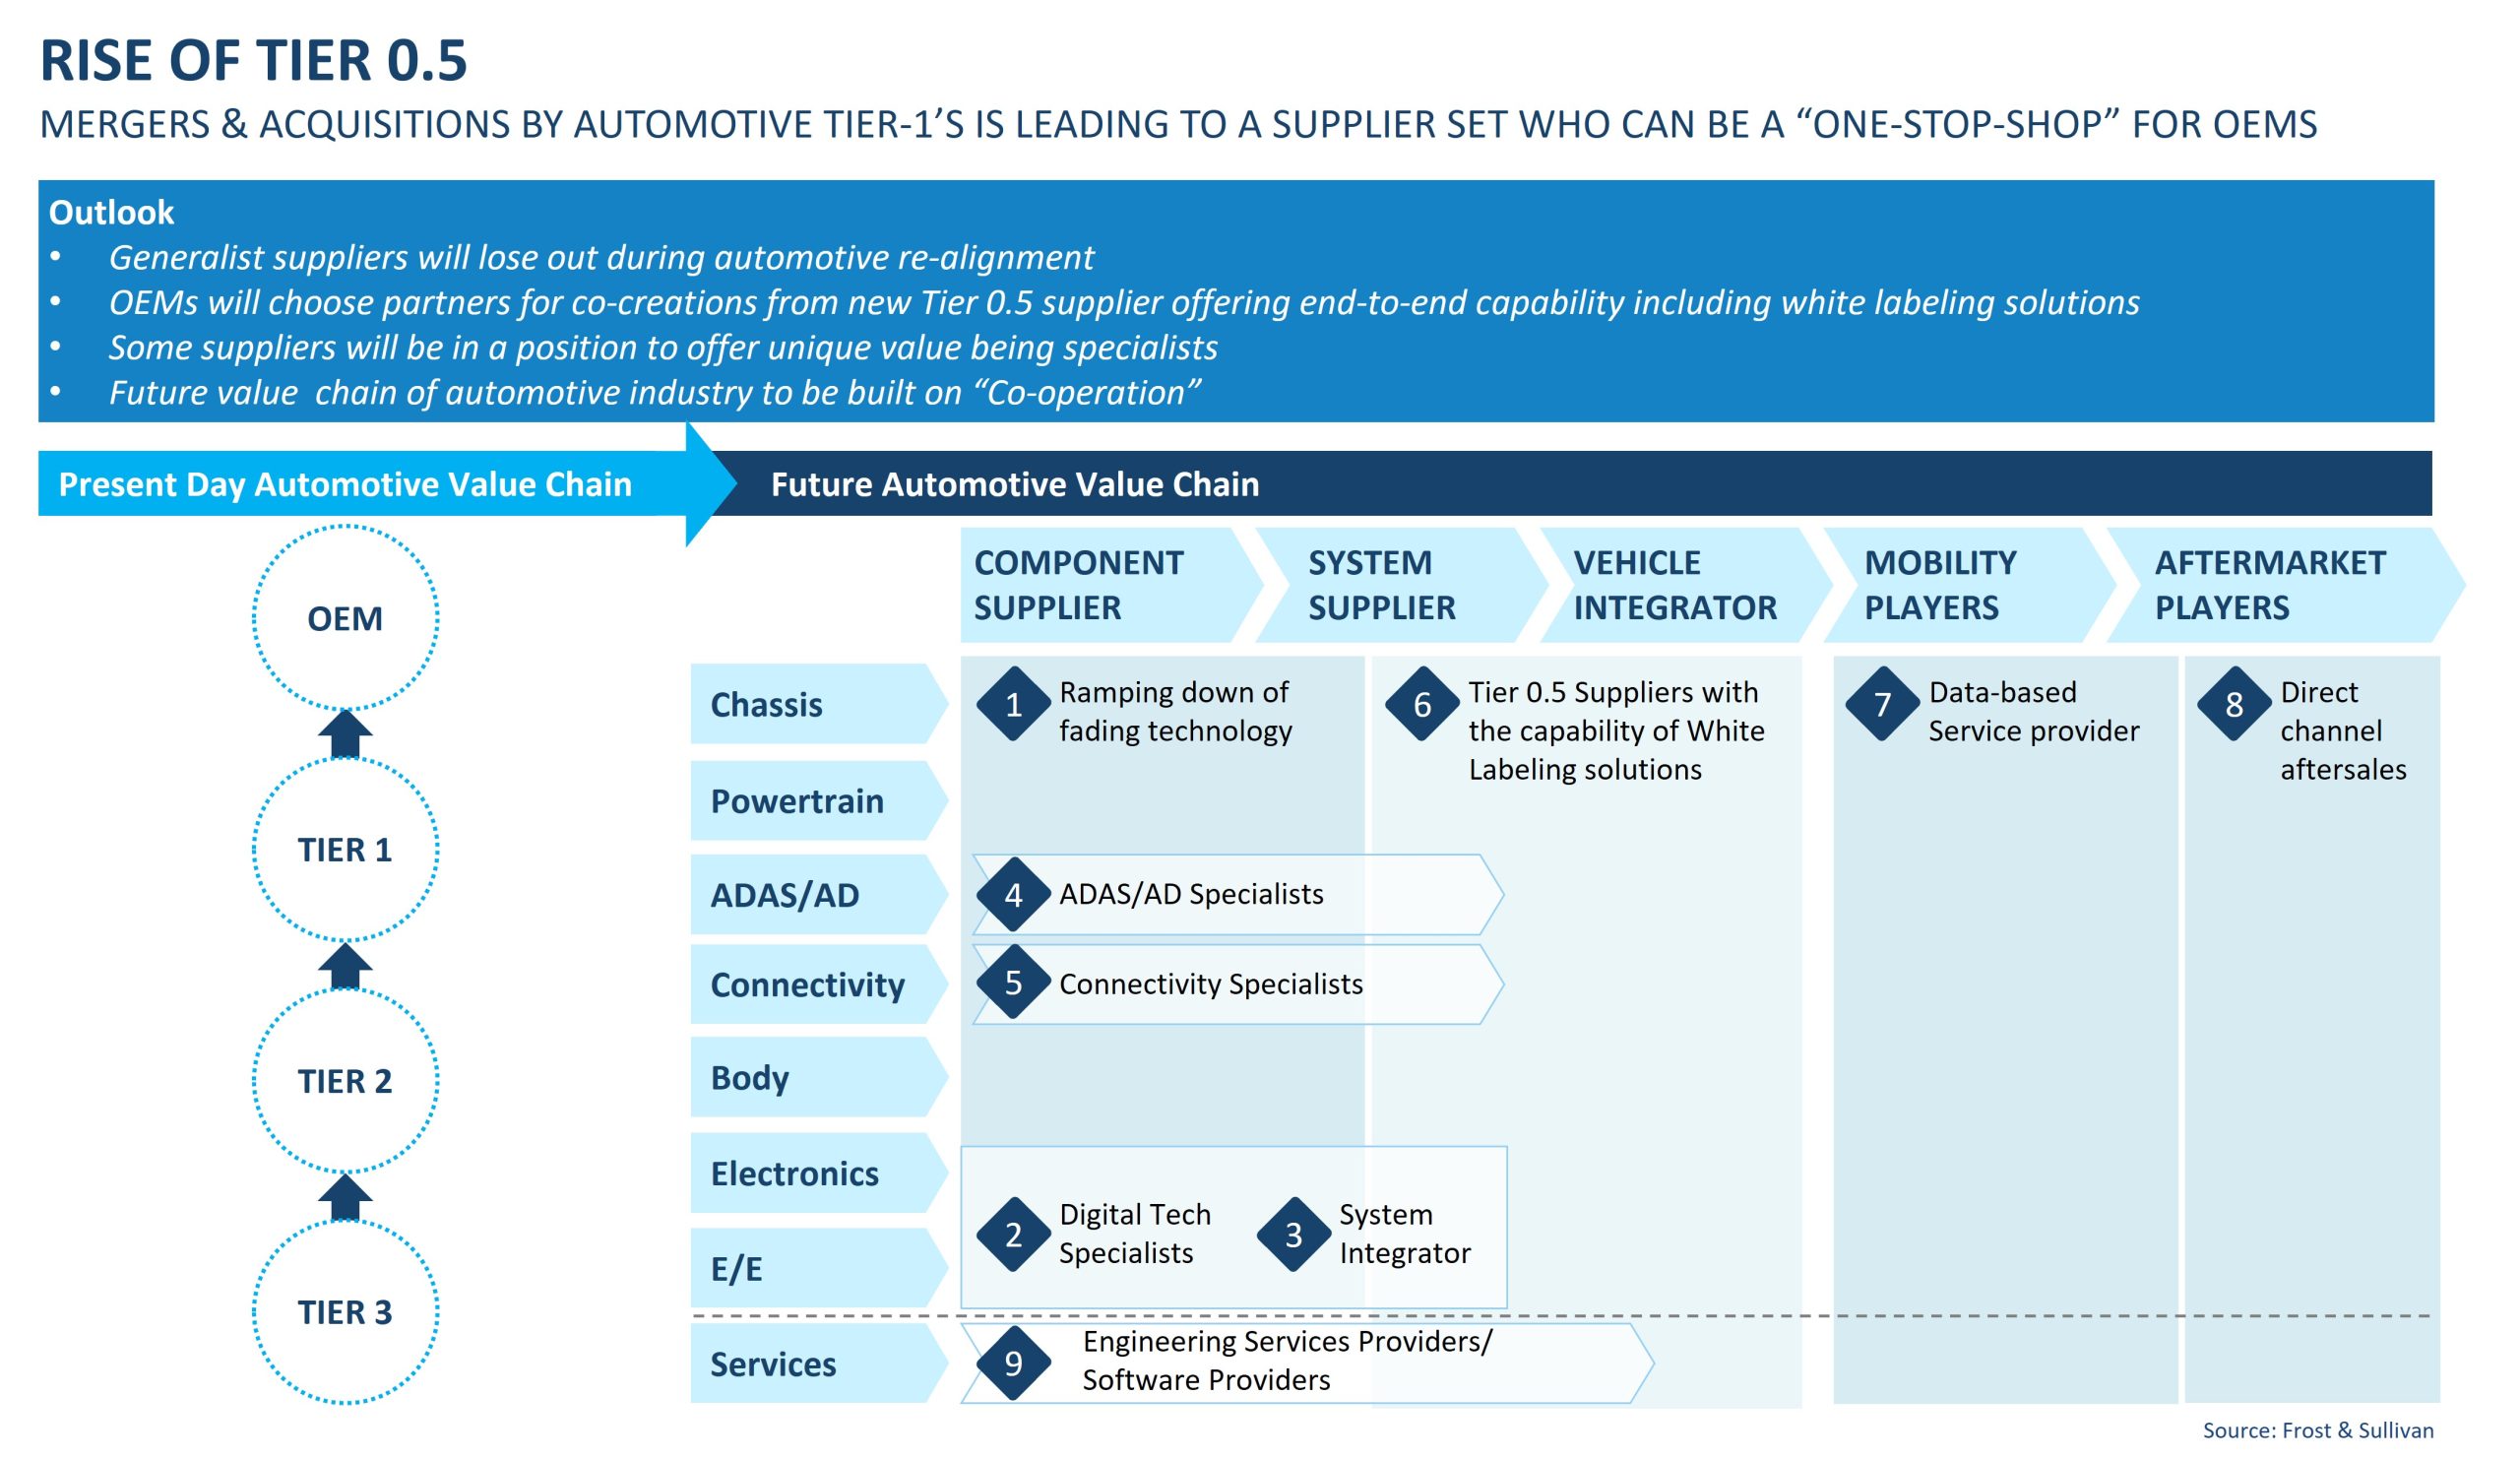 Rise of Tier 0.5 Mergers & Acquisitions by automotive tier-1's is leading to a supplier set who can be a 